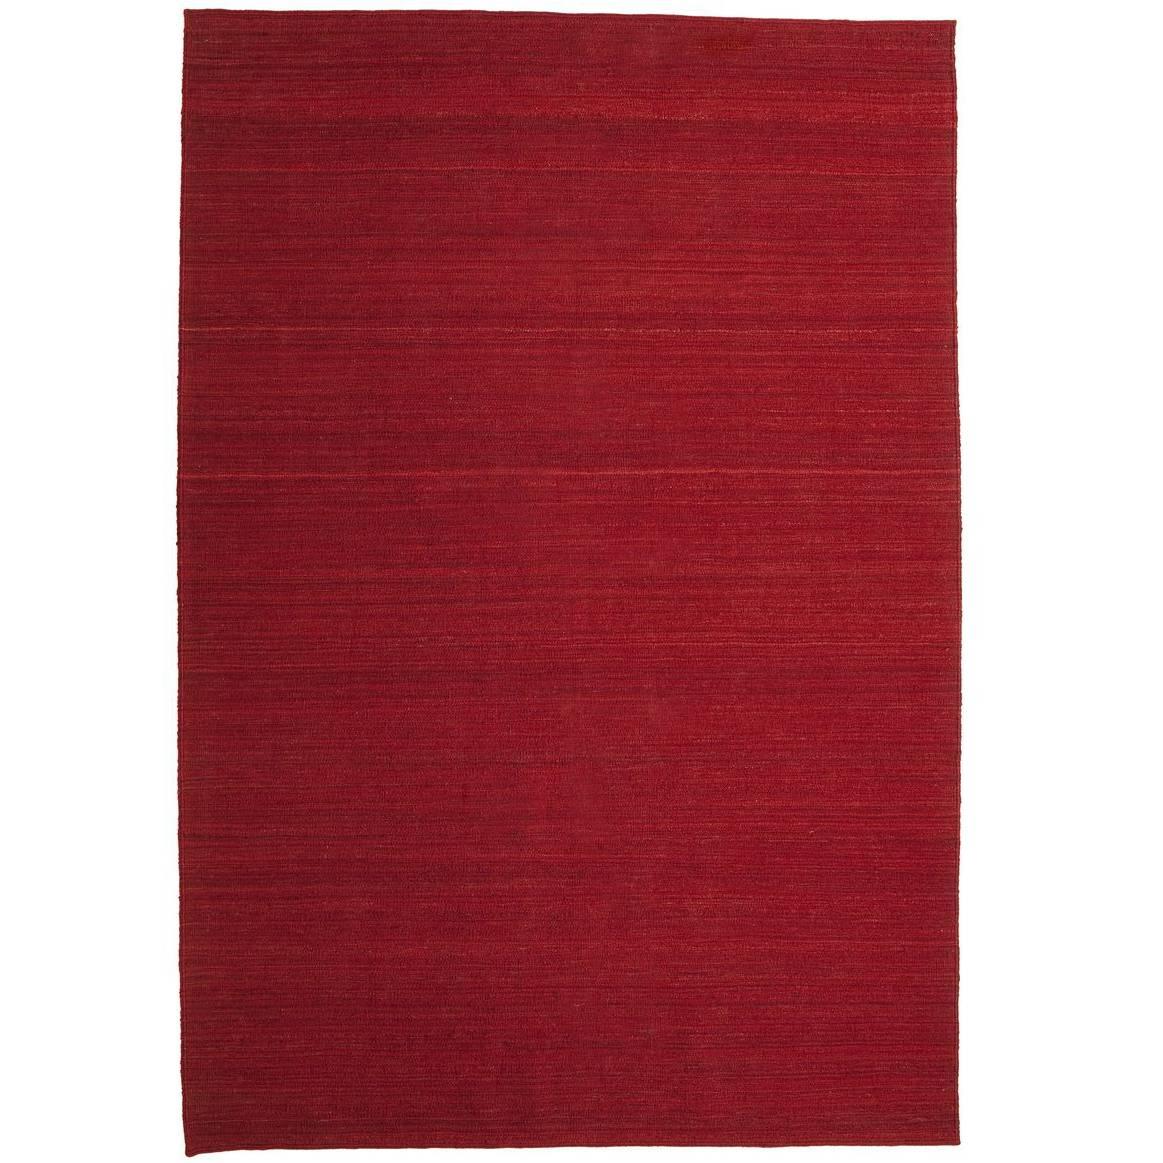 Nomad Deep Red Hand-Loomed Wool Rug by Nani Marquina & Ariadna Miquel, Medium For Sale